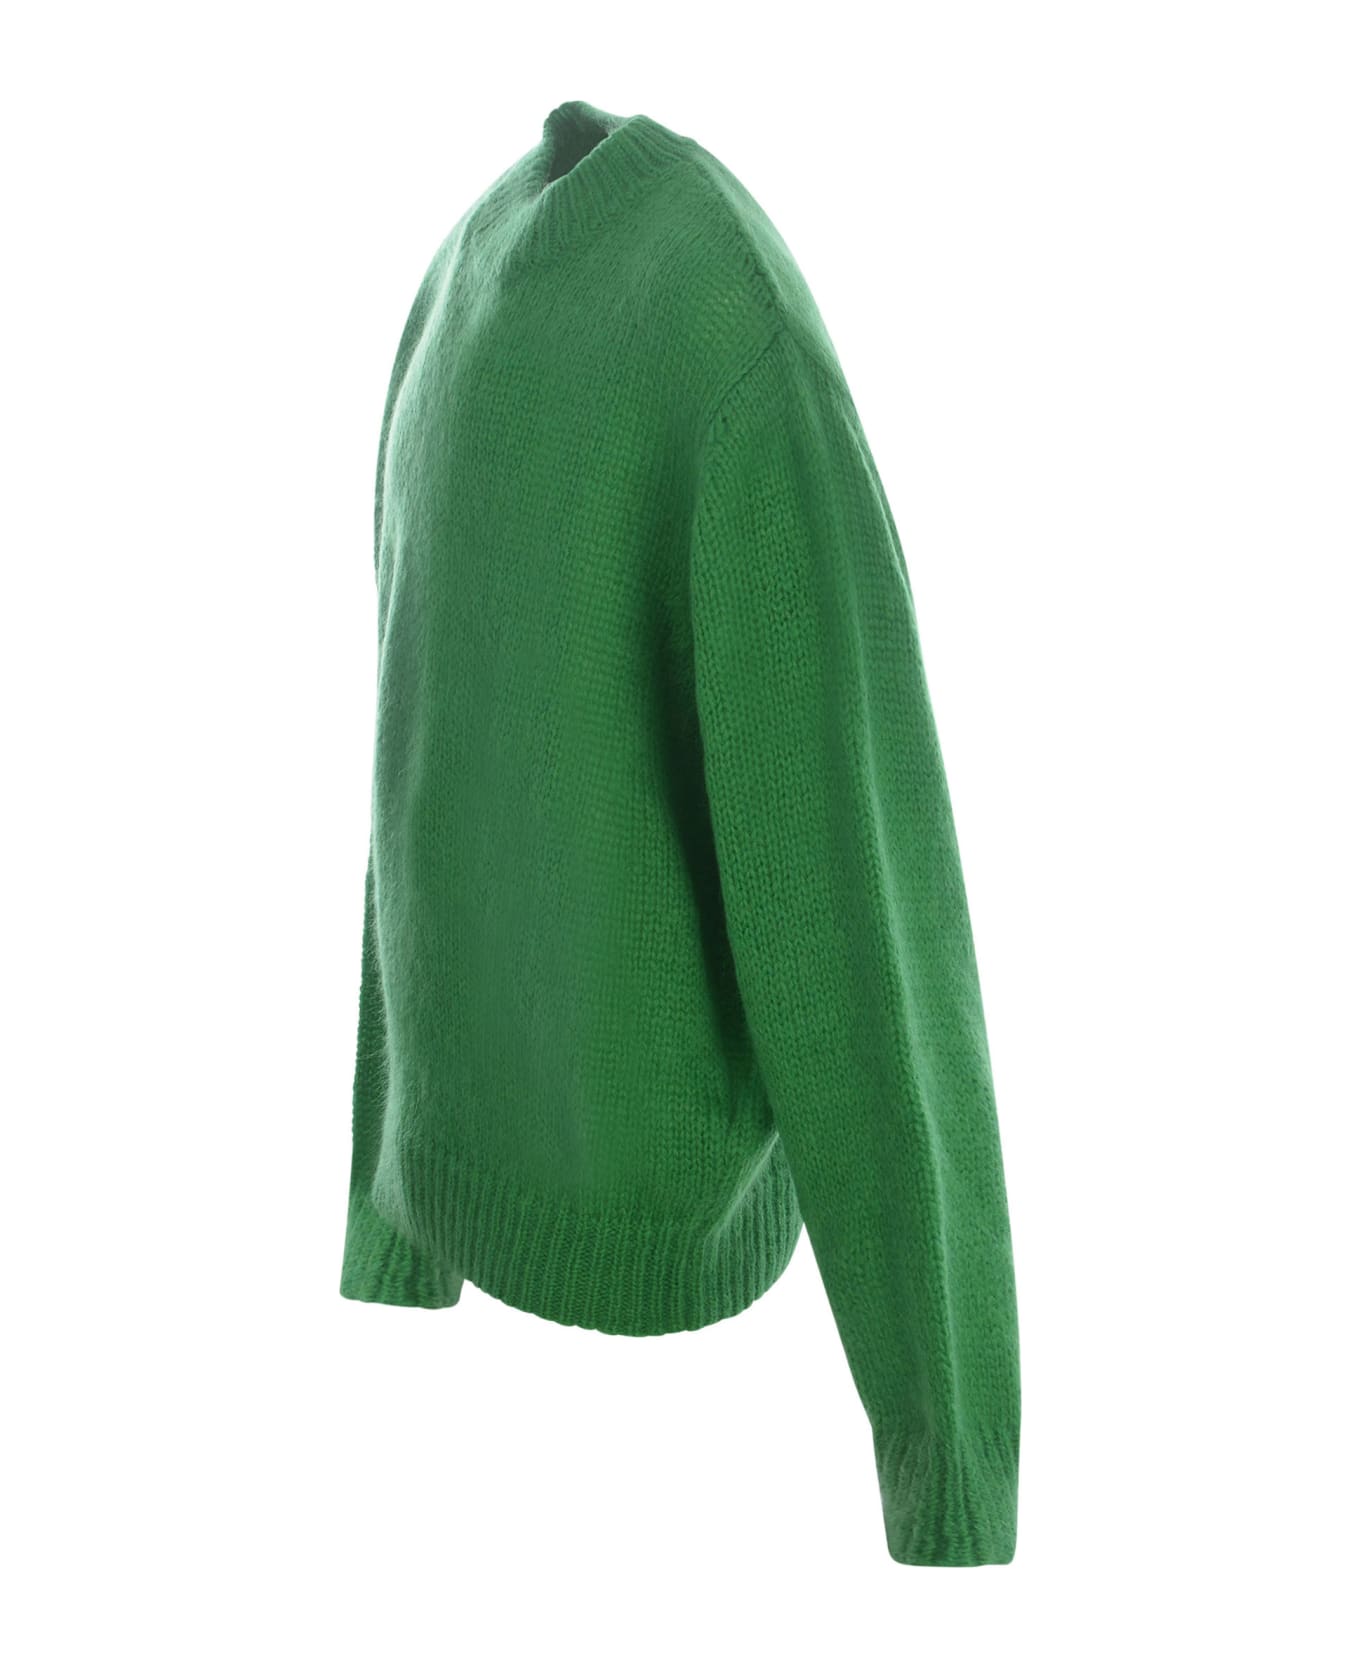 REPRESENT Sweater Represent In Mohair And Wool Blend - Verde